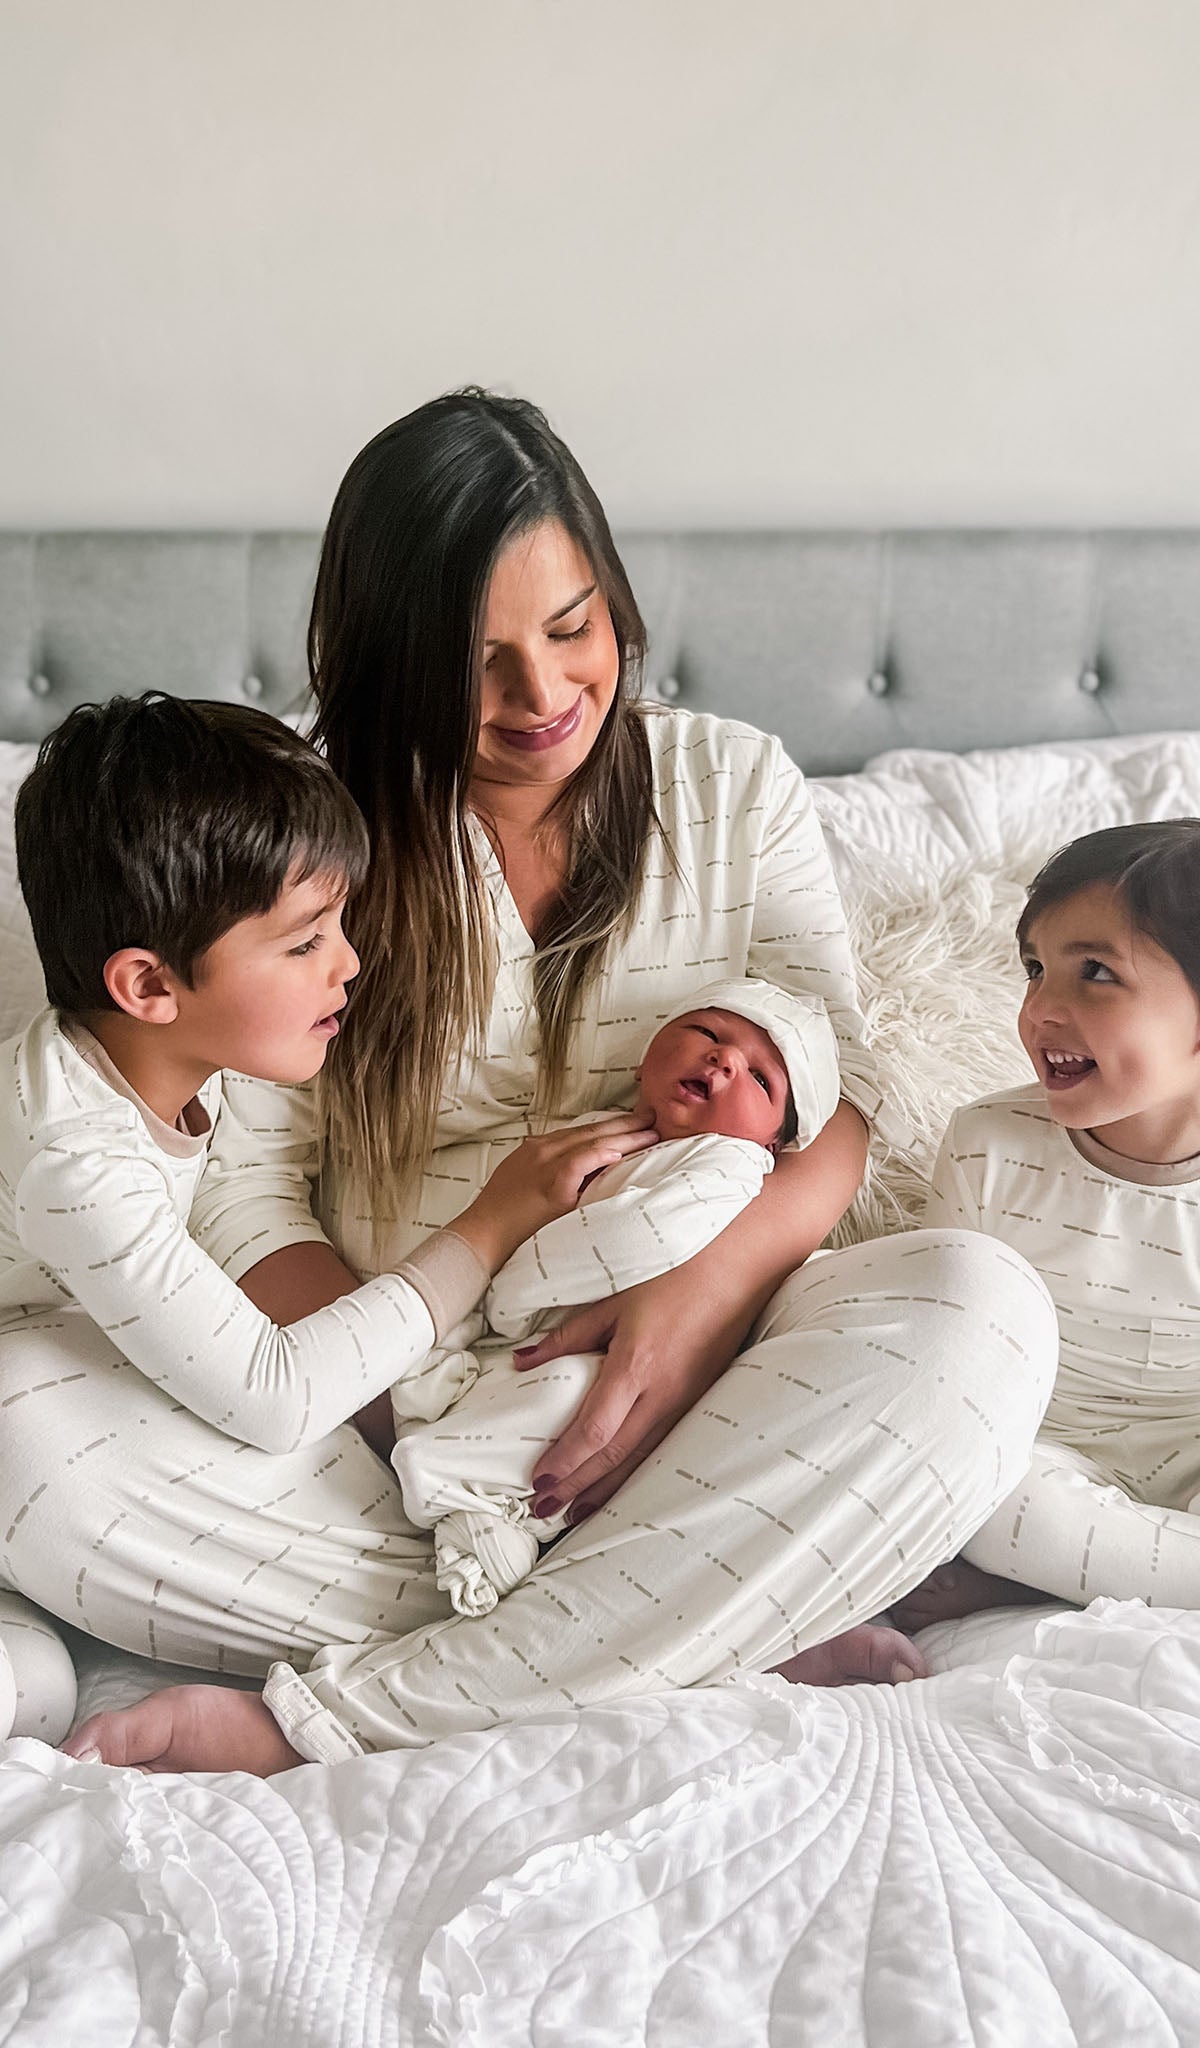 Love Analise 5-Piece Set worn by mom and her two sons and baby boy.